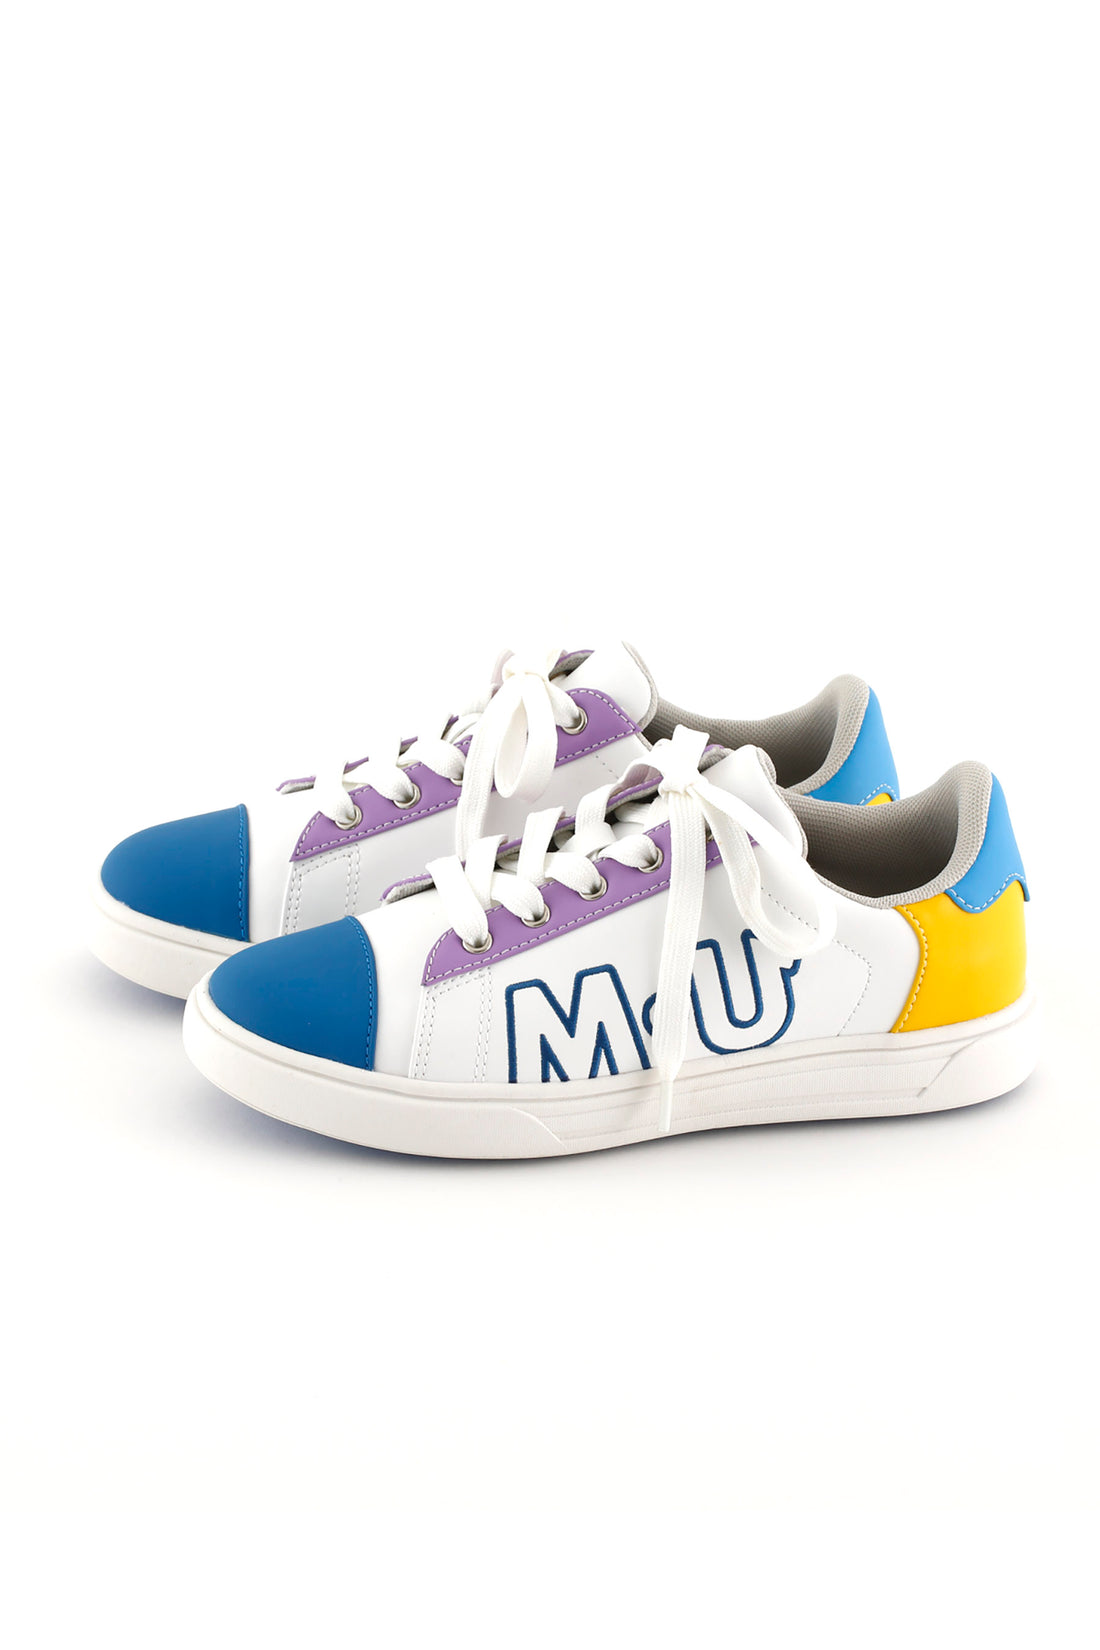 Multi-nuance color spikeless shoes (703Q1600)